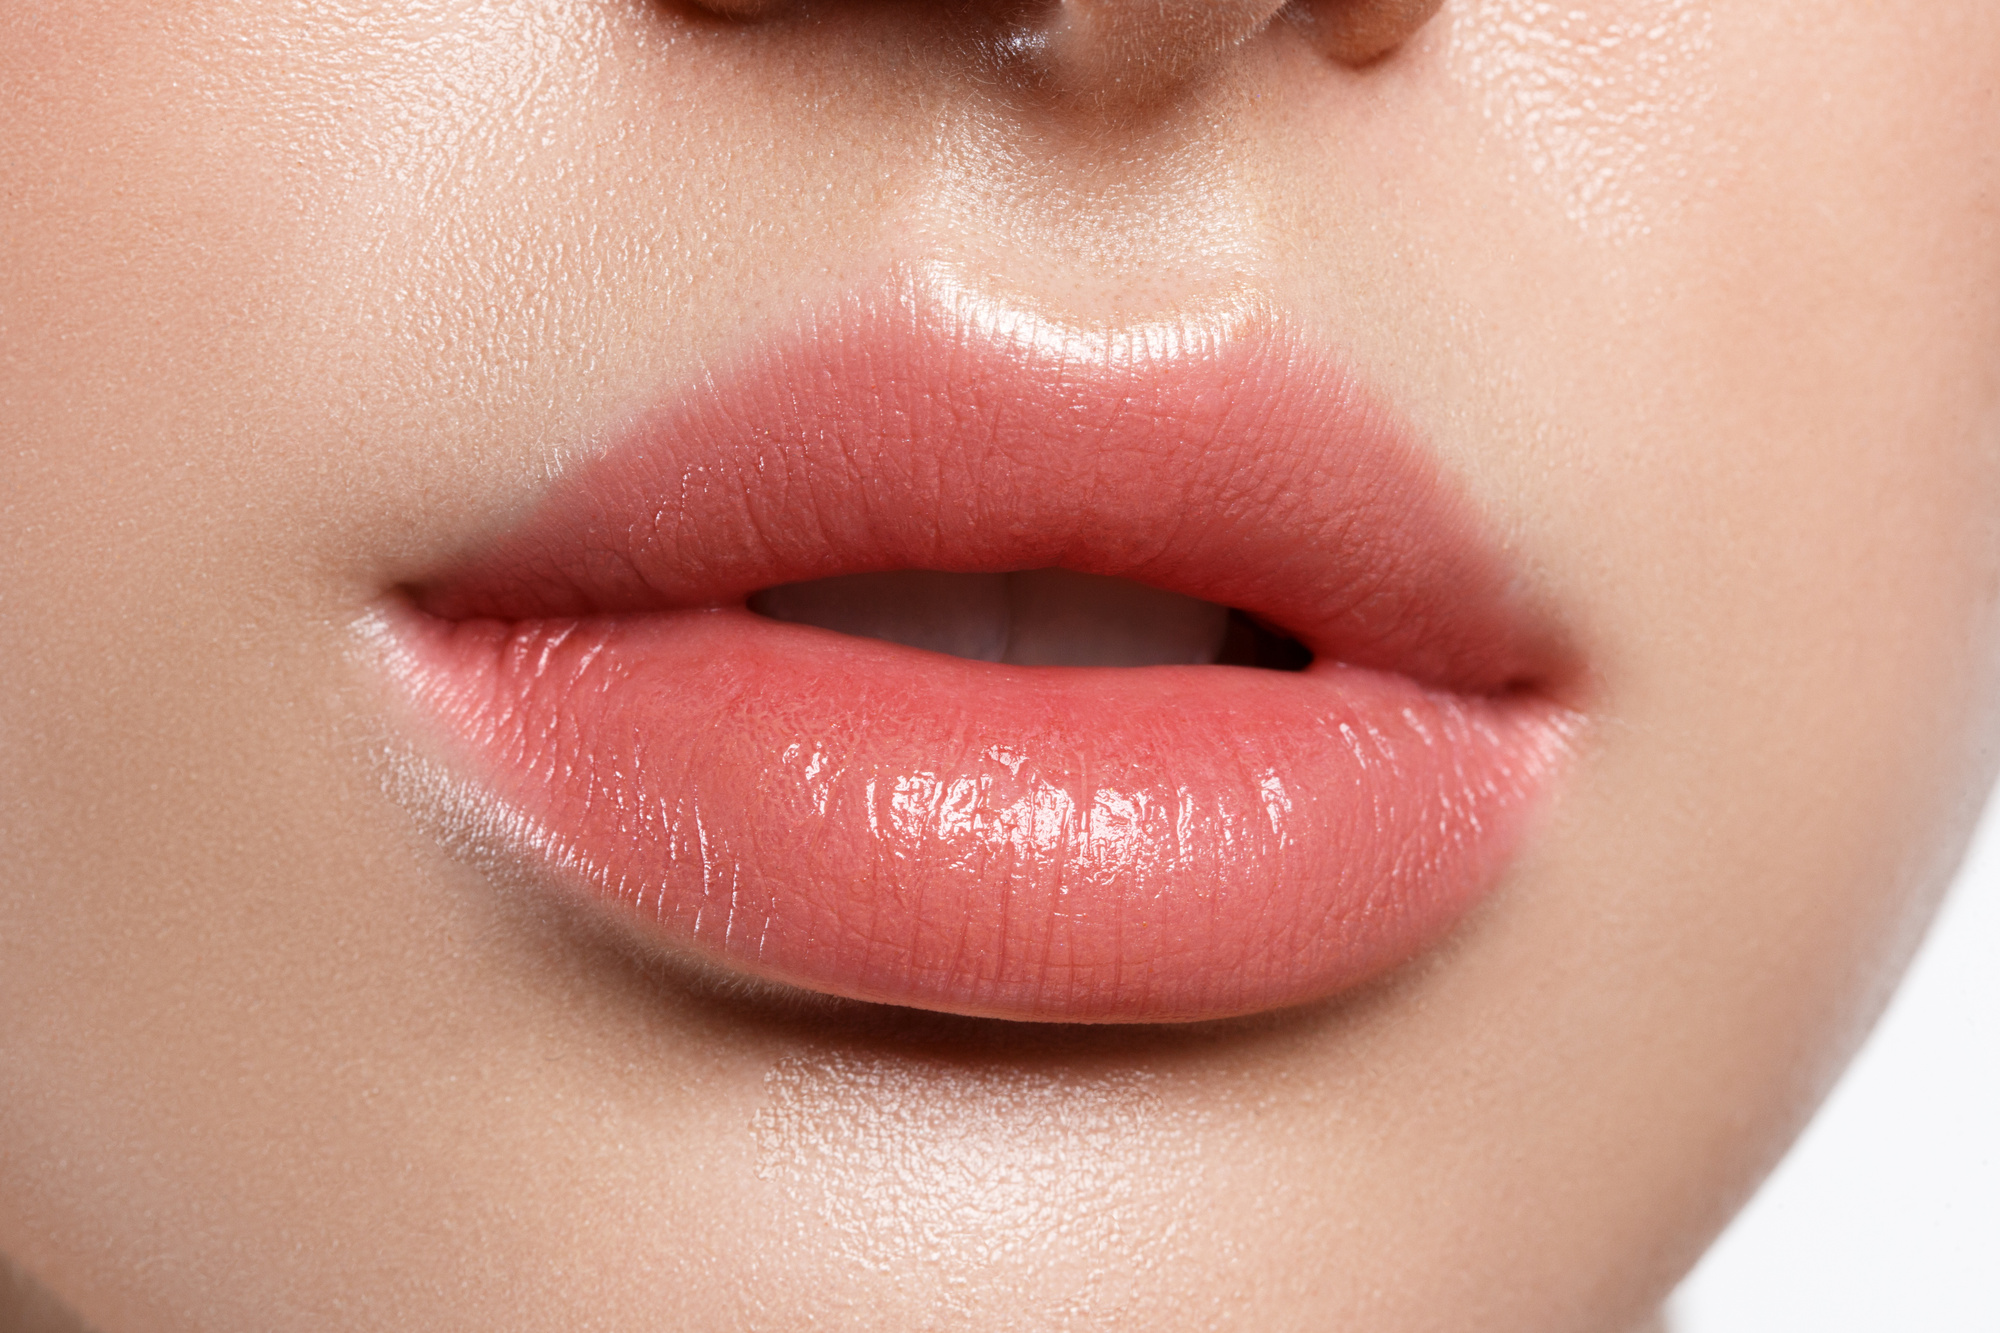 If you want to have beautiful lips, there are several things you should try. These tips will really make a huge difference.